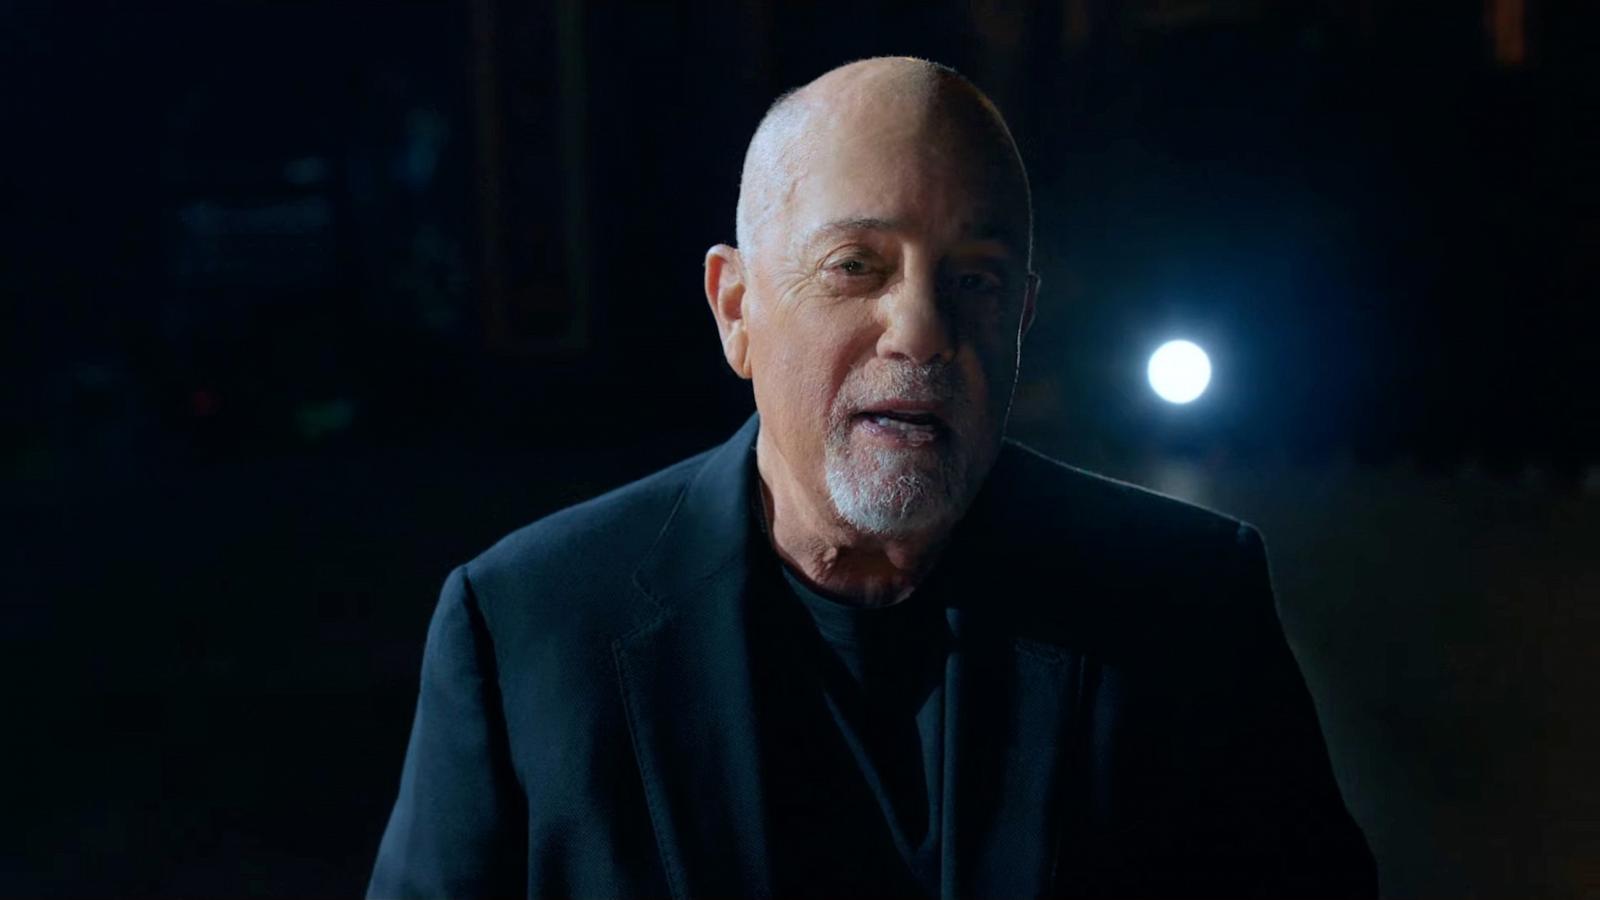 PHOTO: Billy Joel in "Turn the Lights Back On."